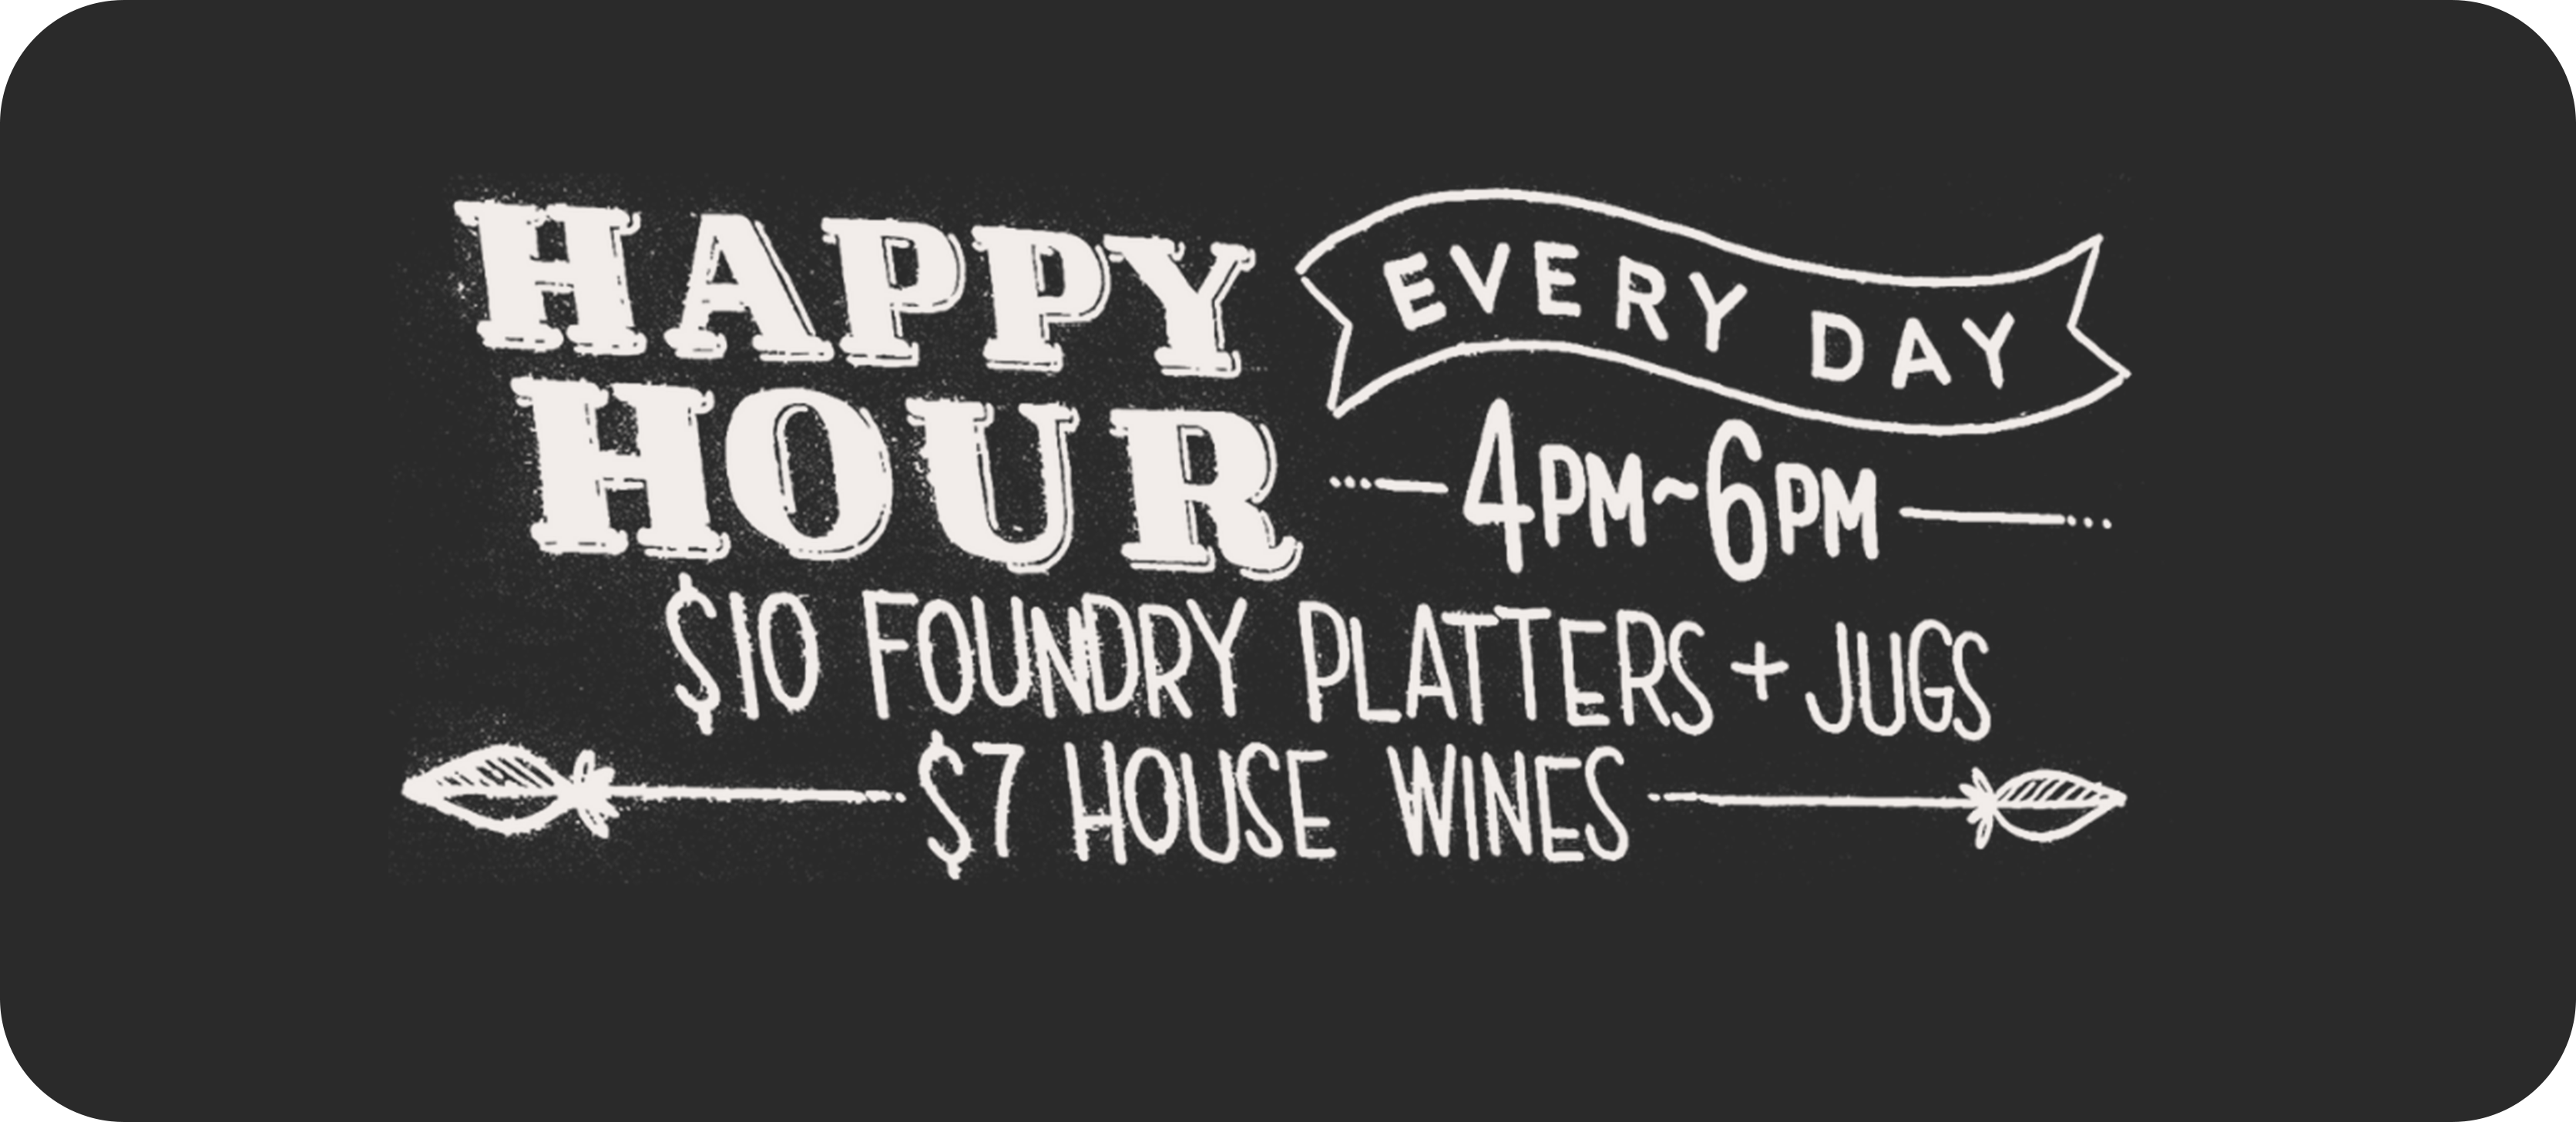 Advertisement for happy hour every weekday 4pm-6pm